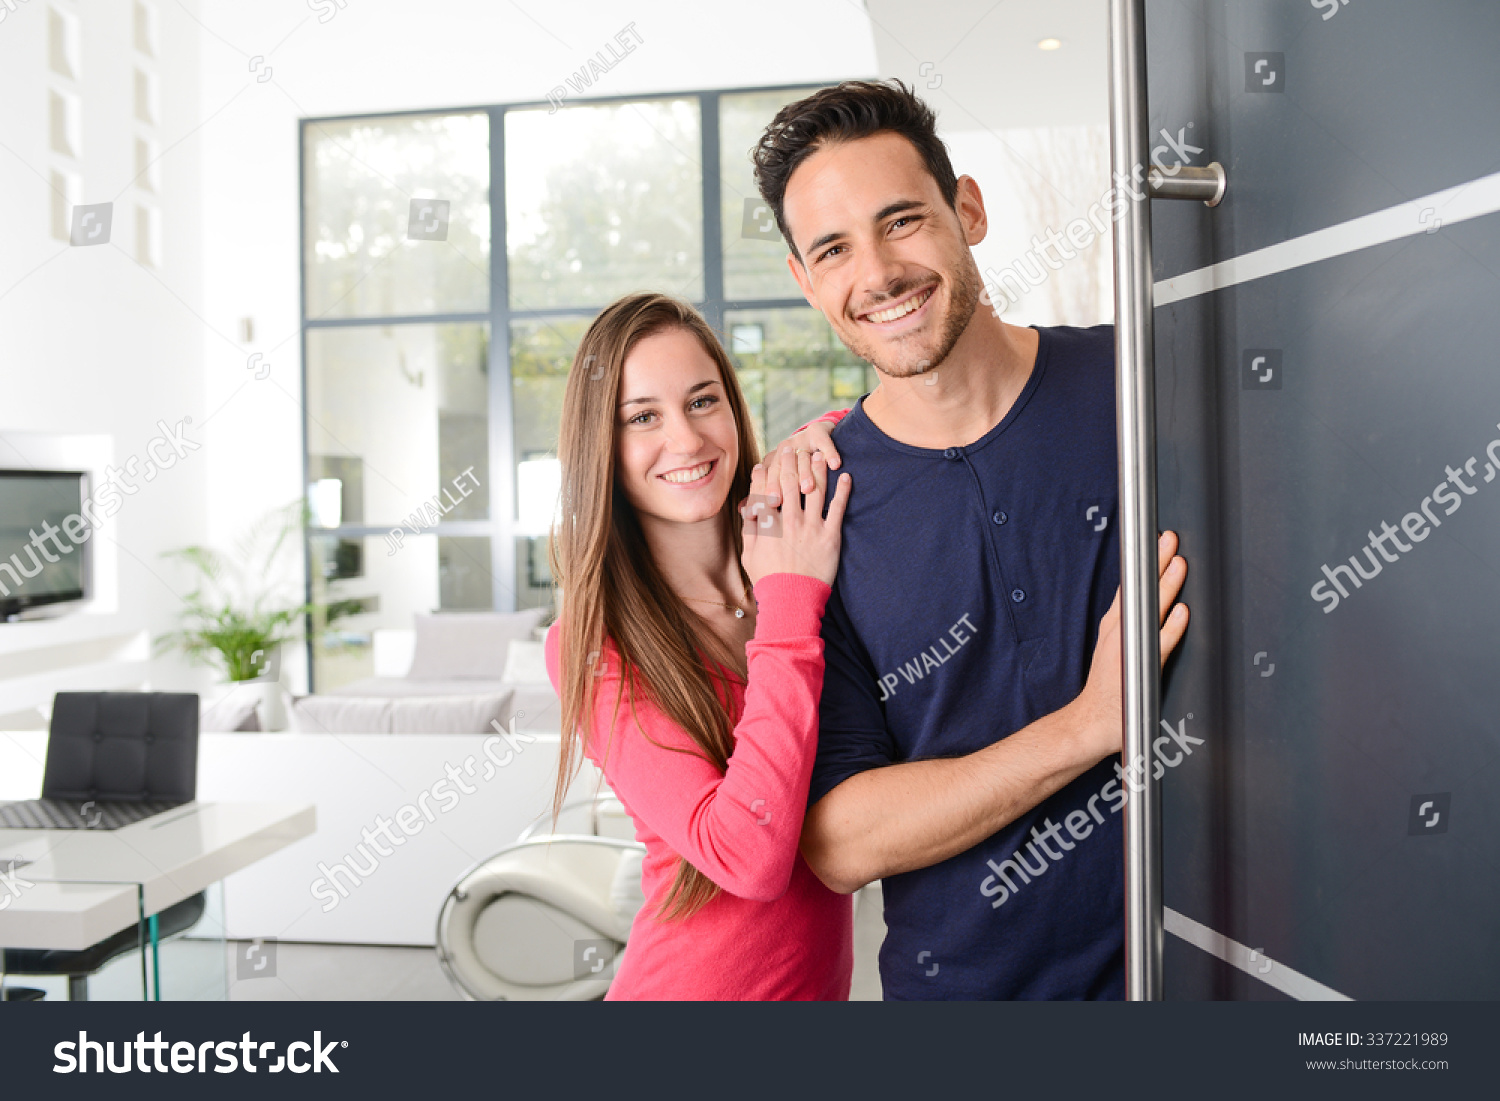 happy young couple at new house front door welcoming people  #337221989